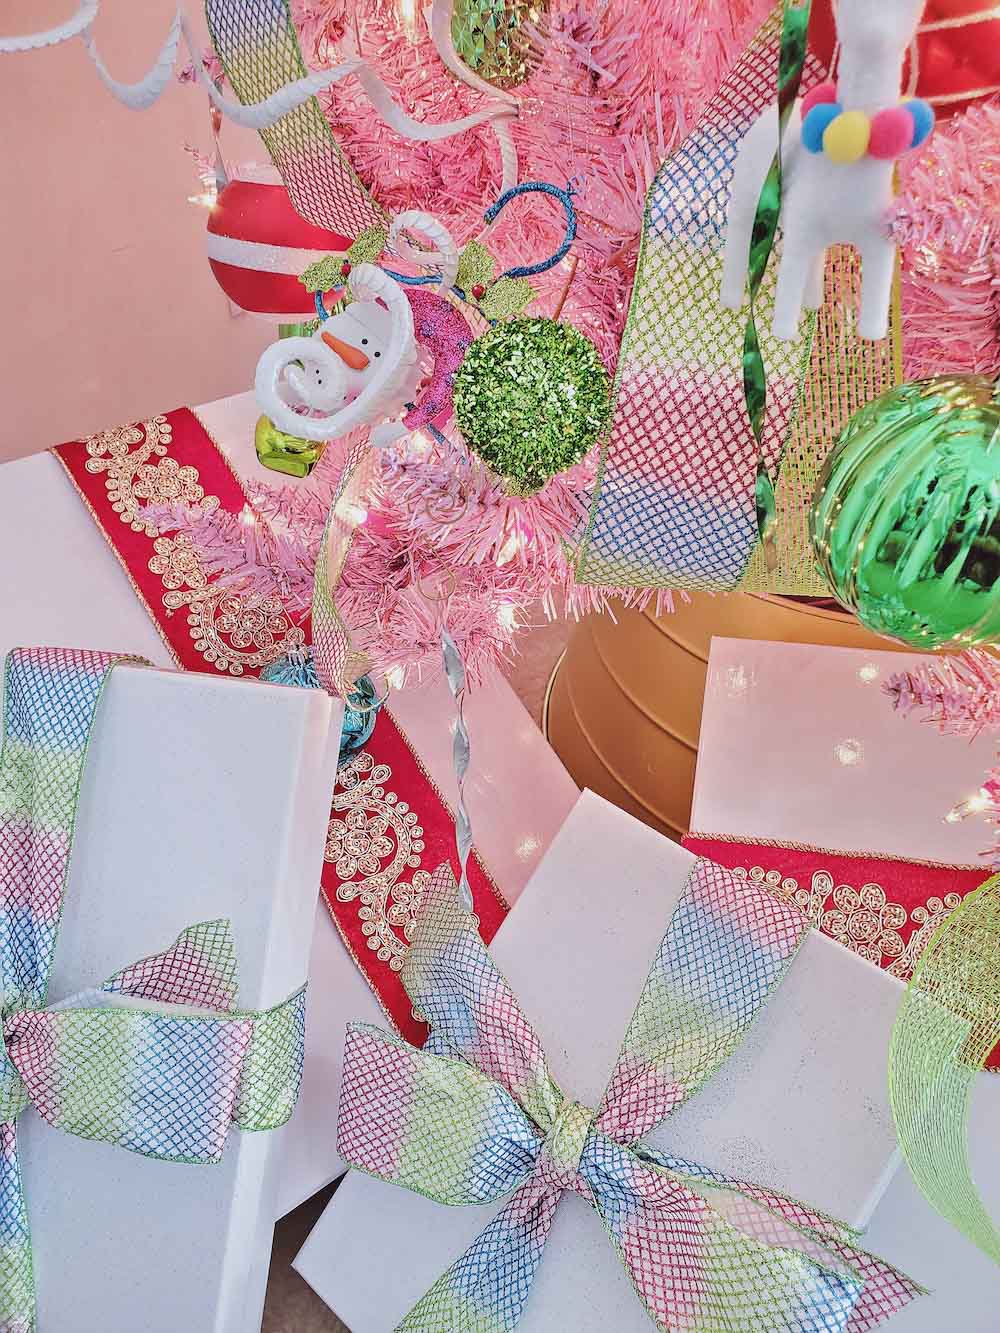 Close up shot of colorful gift boxes and tree ornaments